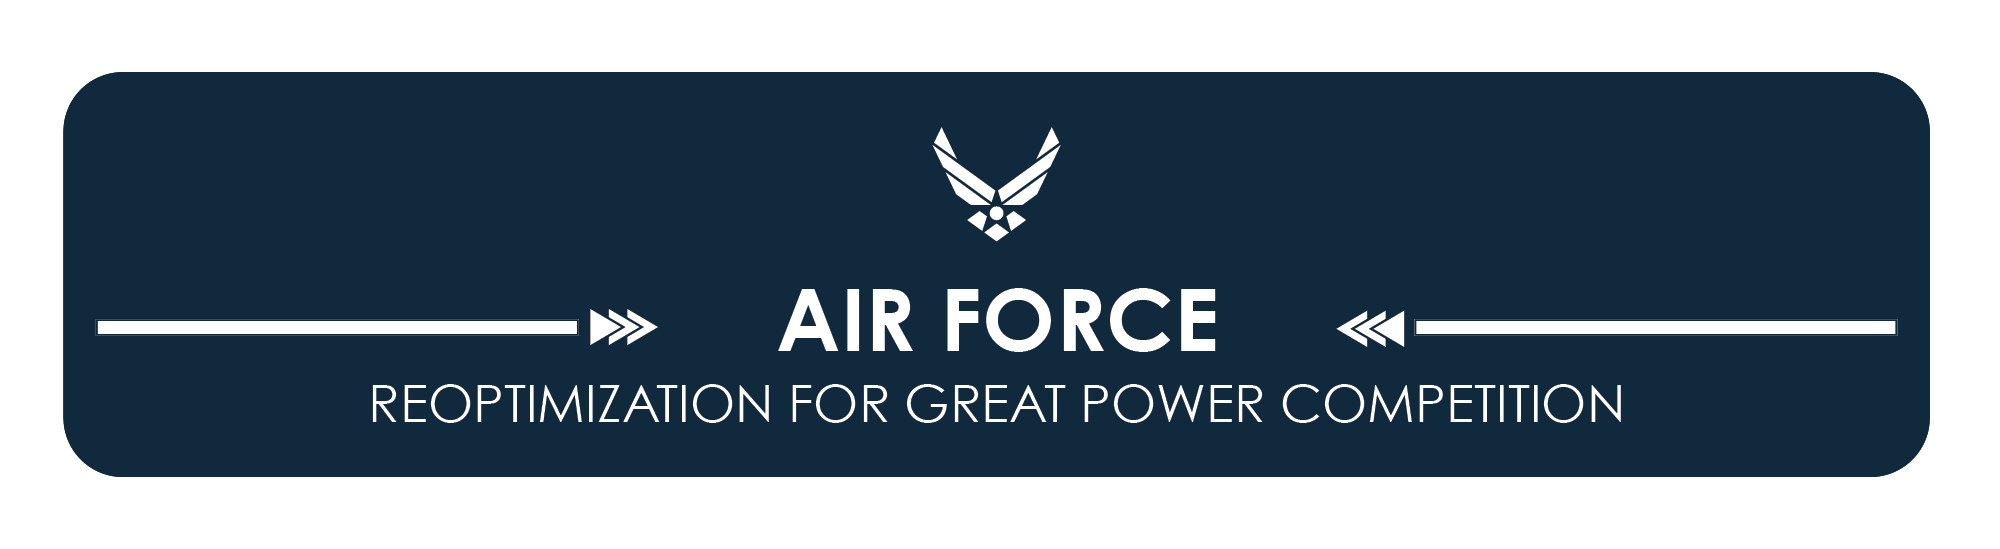 Air Force Great Power Competition 